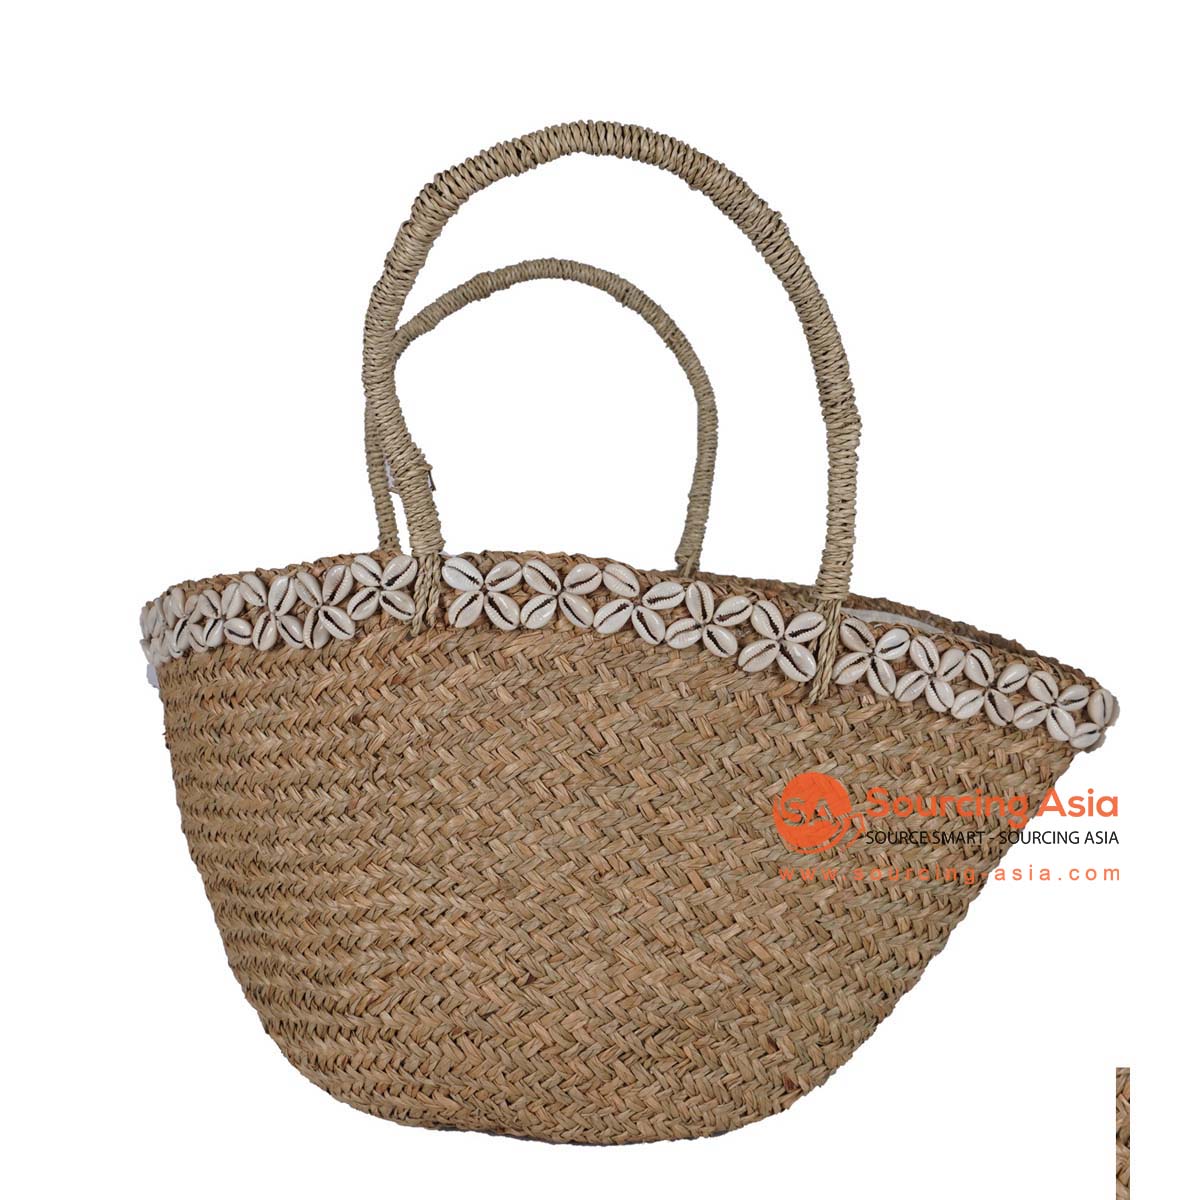 HBSC252-5 NATURAL MENDONG BAG WITH HANDLE AND SHELL